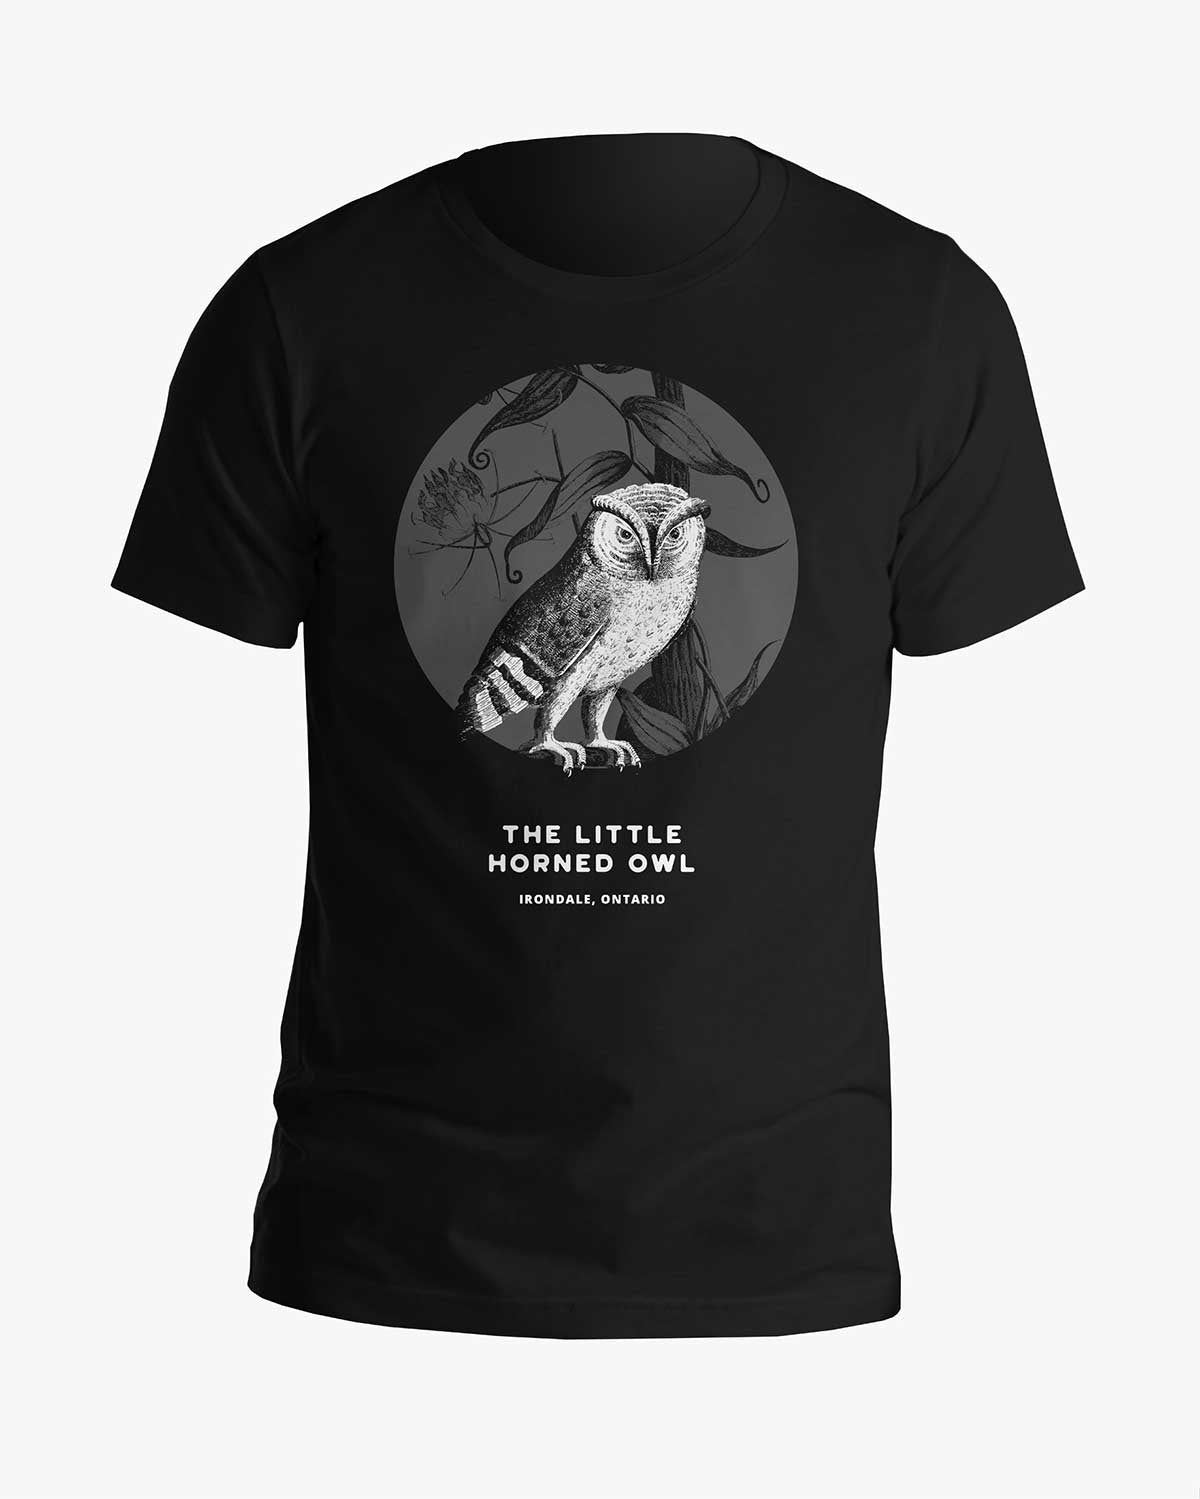 The Little Horned Owl - Irondale - Tee